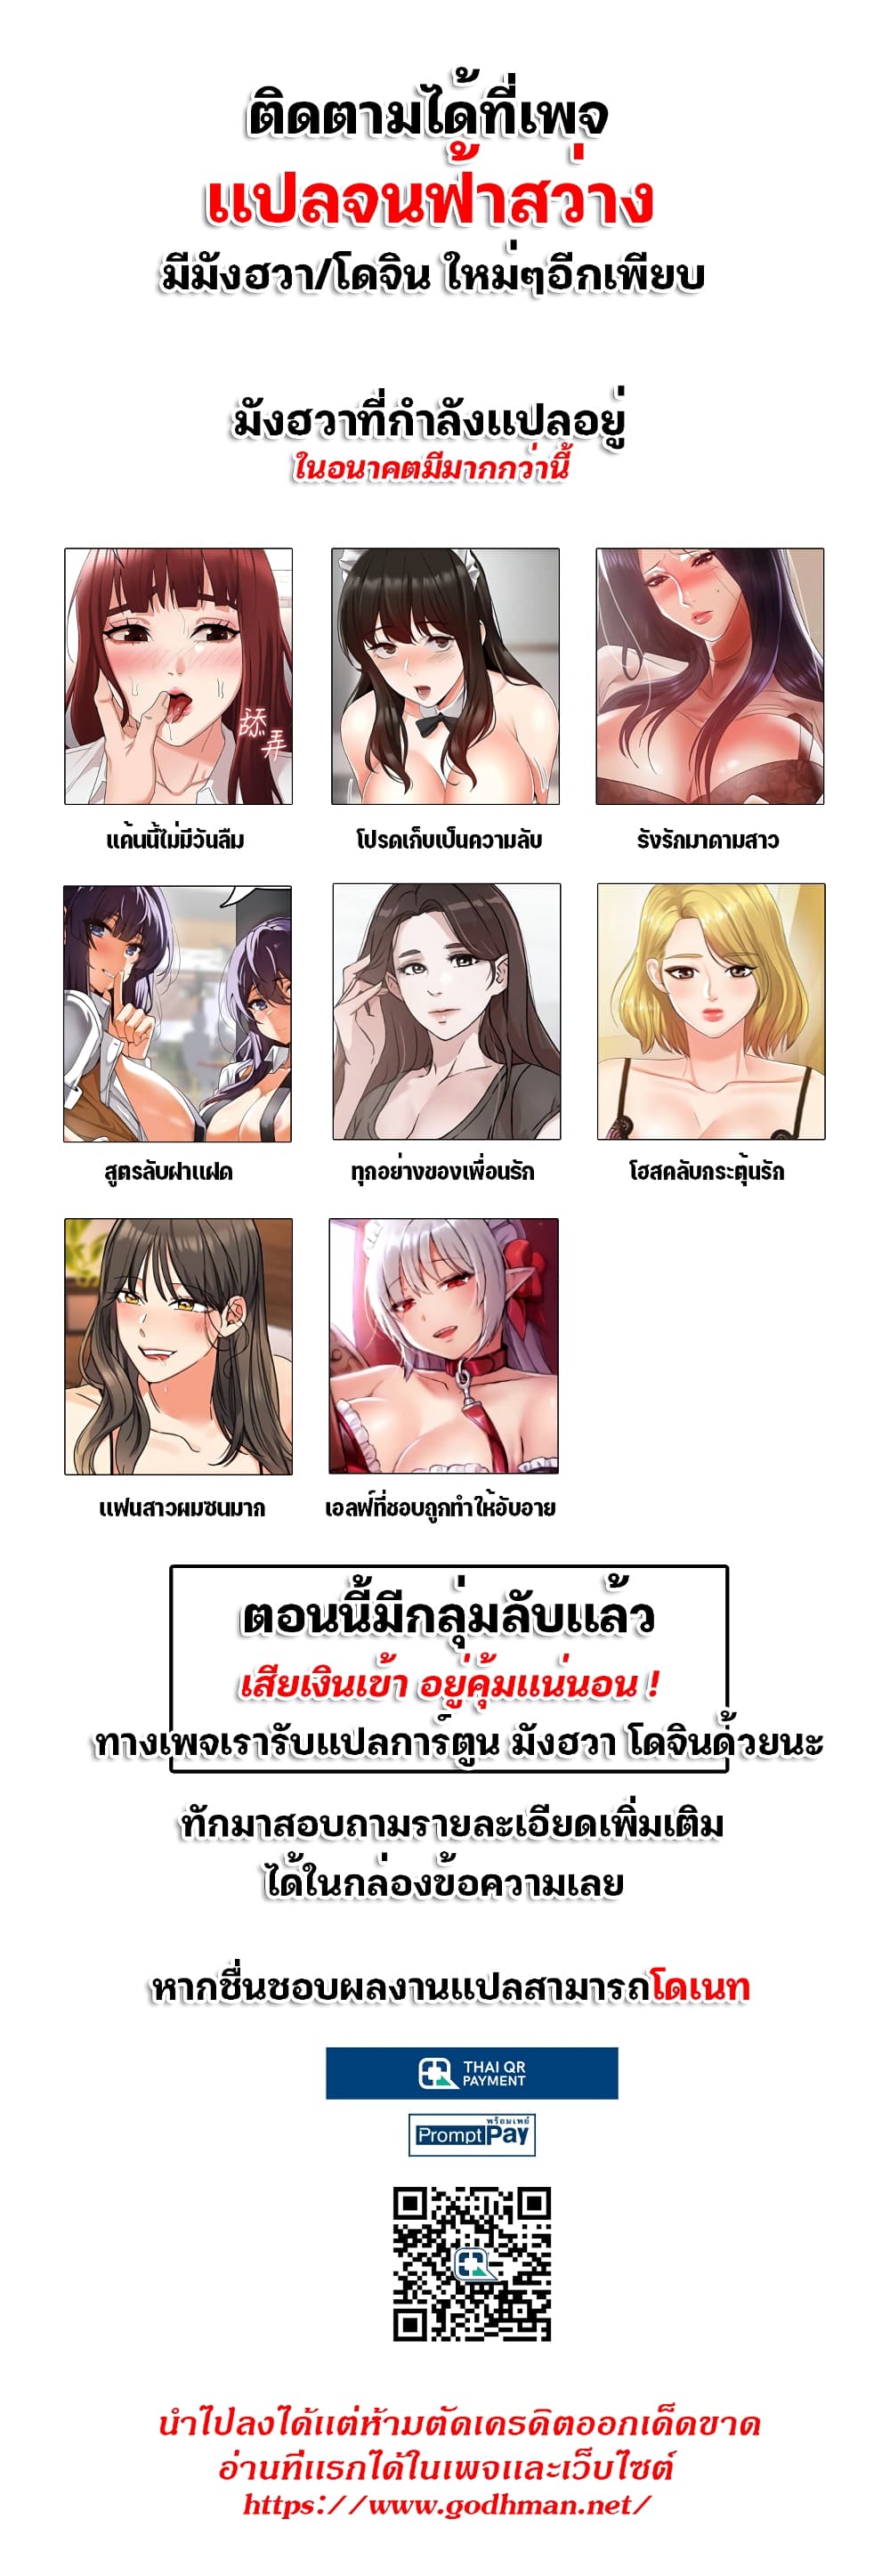 Everything About Best Friend 69 ภาพที่ 1